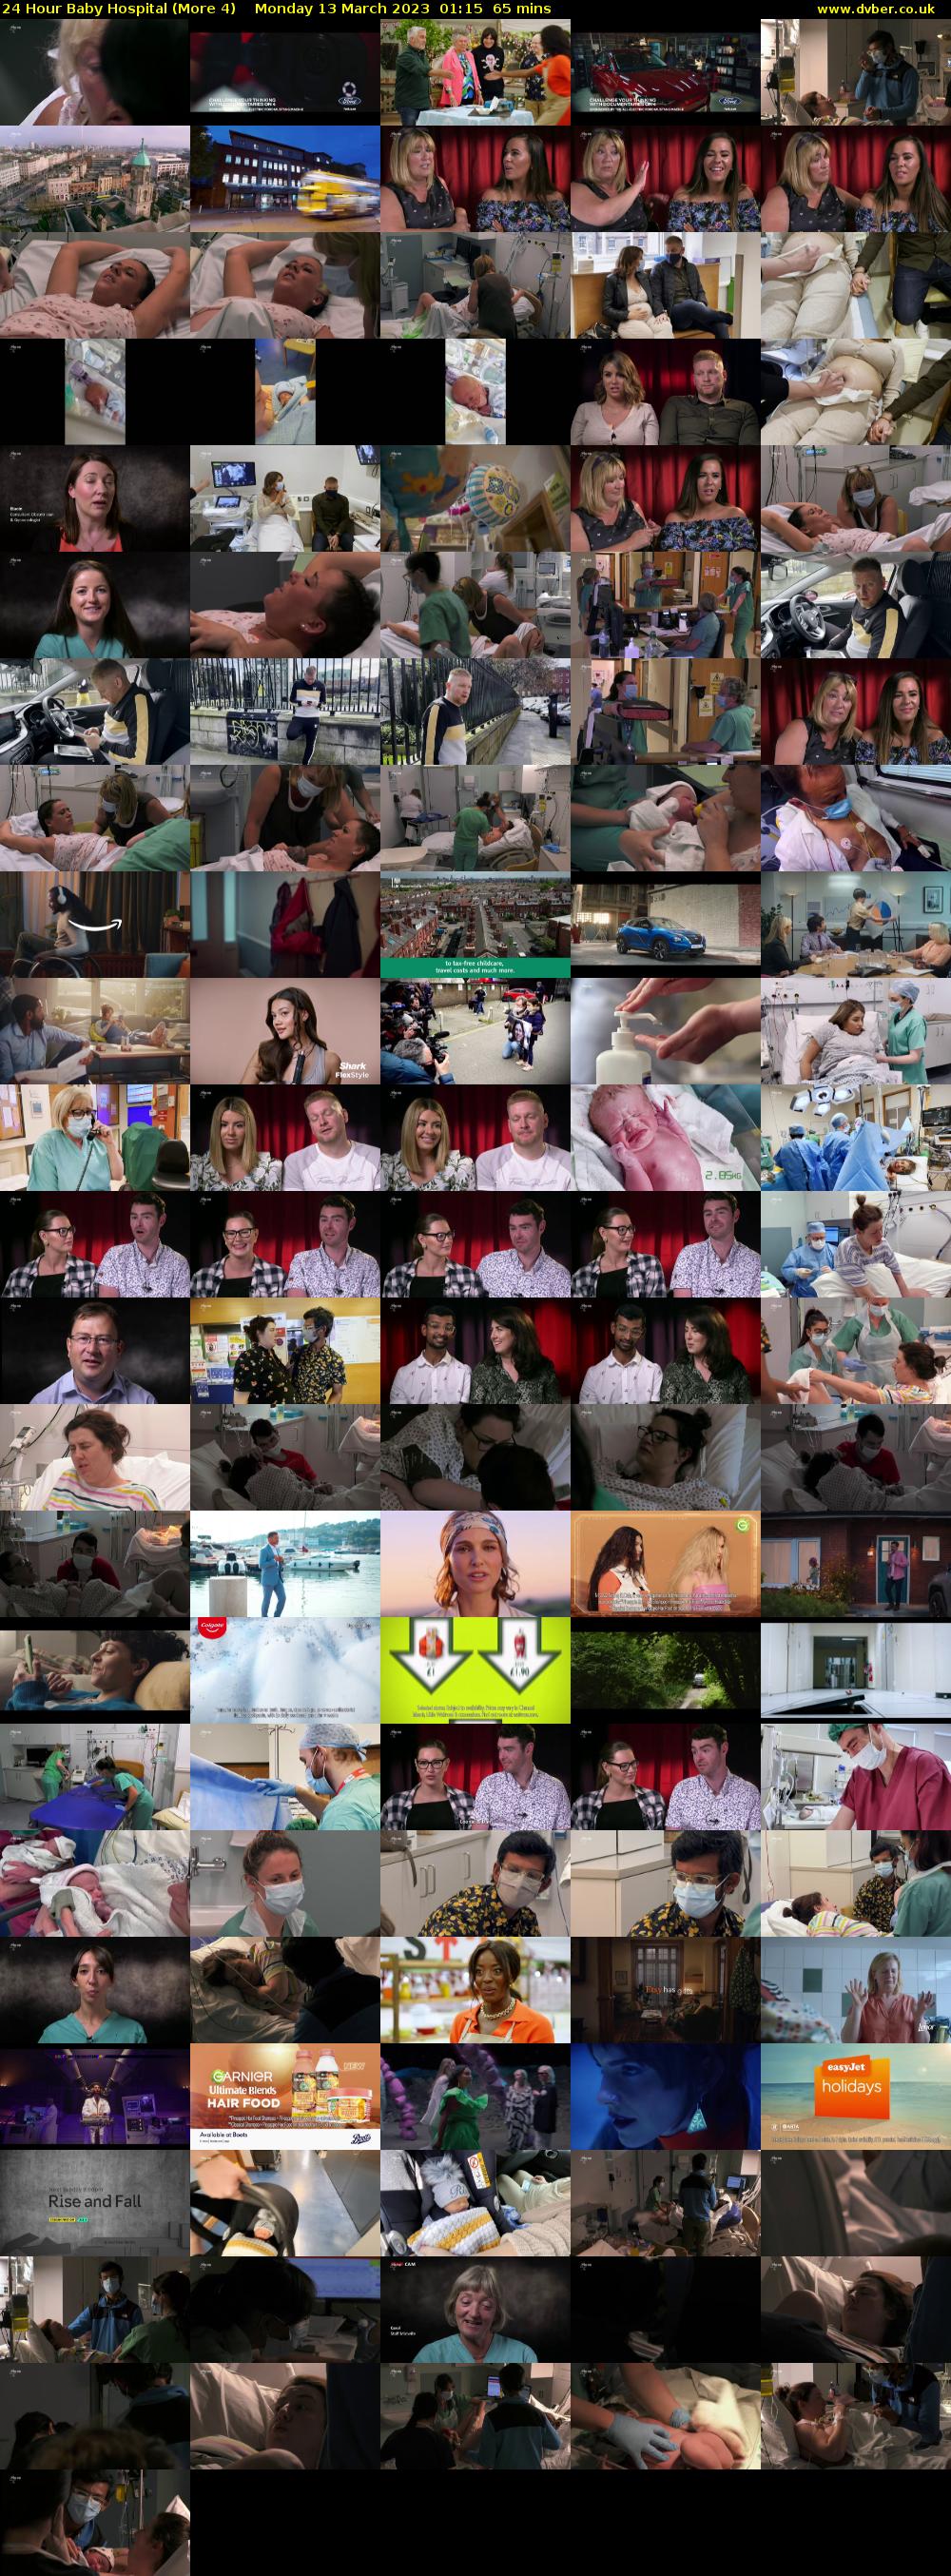 24 Hour Baby Hospital (More 4) Monday 13 March 2023 01:15 - 02:20